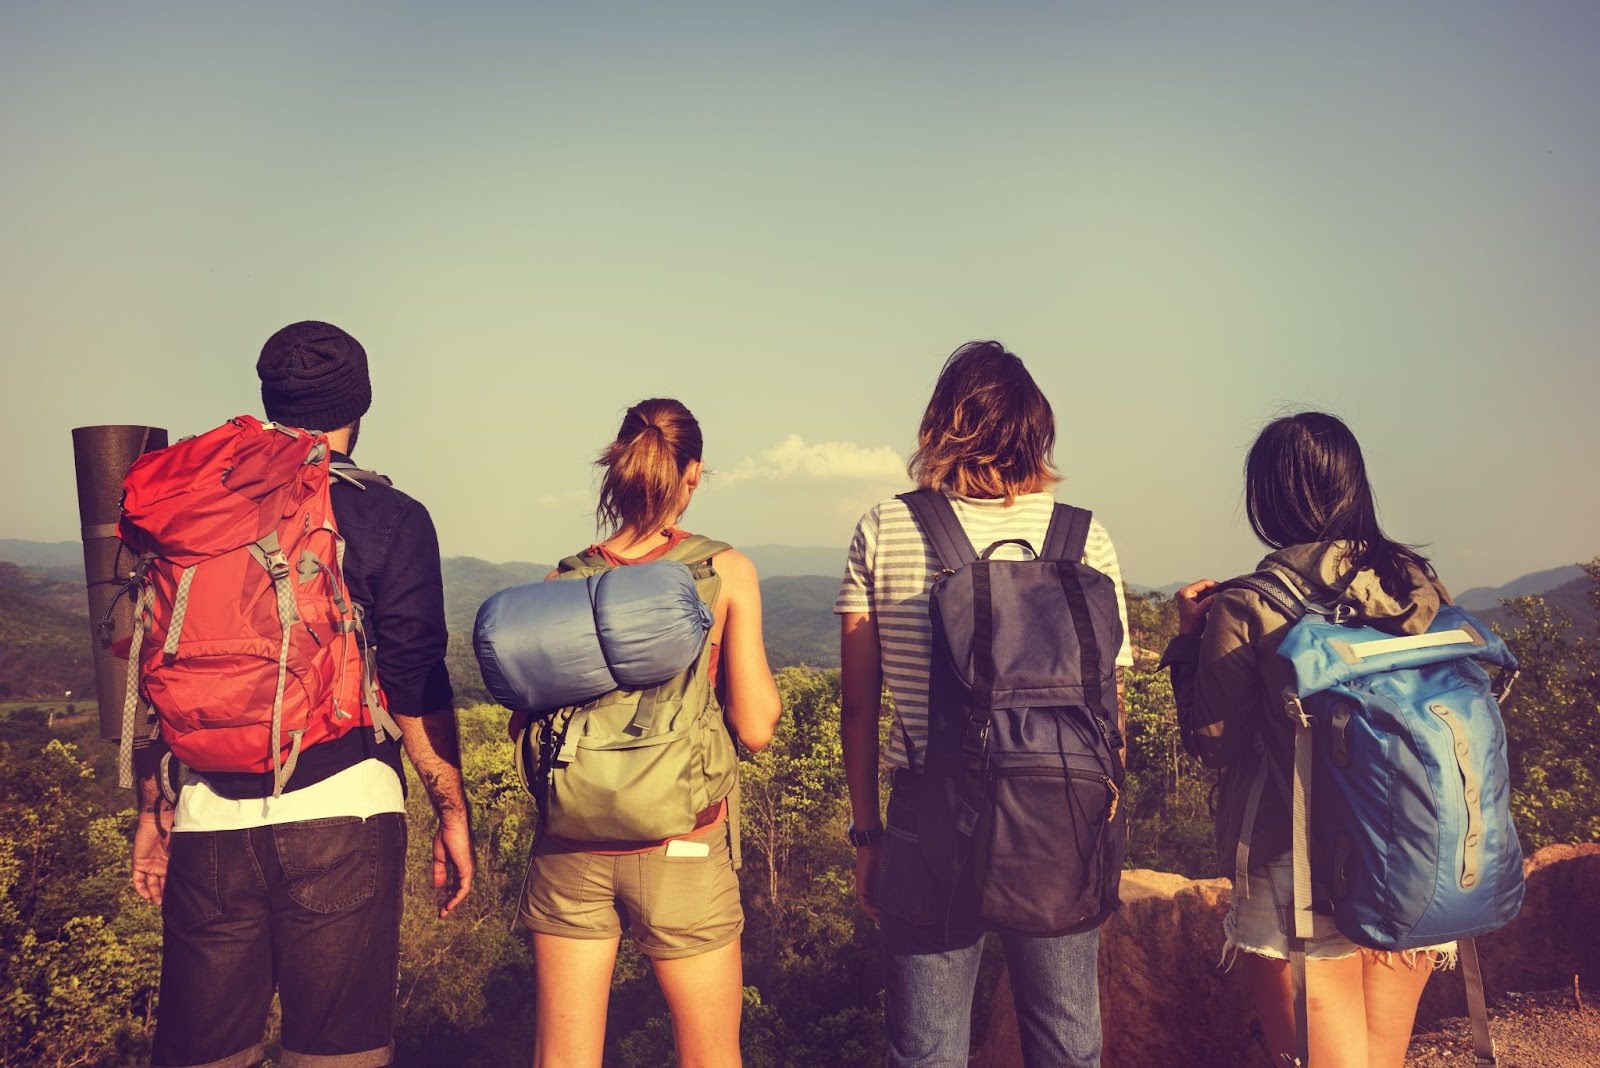 Four people with backpacks standing on a hilltop, overlooking mountains.